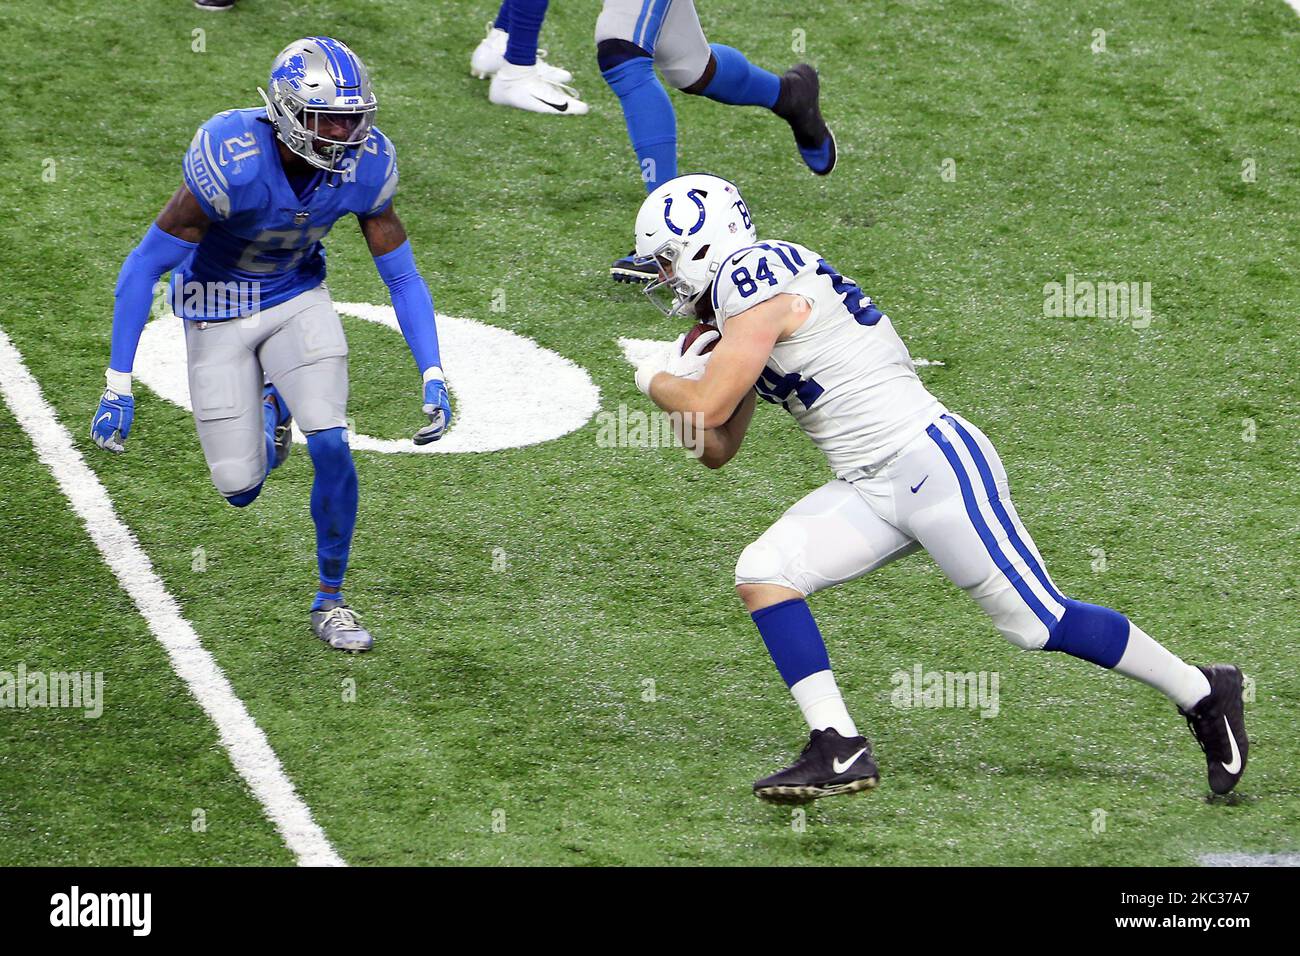 Indianapolis Colts tight end Jack Doyle (84) carries the ball under the pressure of Detroit Lions defensive back Tracy Walker (21) during the second half of an NFL football game against the Detroit Lions in Detroit, Michigan USA, on Sunday, November 1, 2020. (Photo by Amy Lemus/NurPhoto) Stock Photo